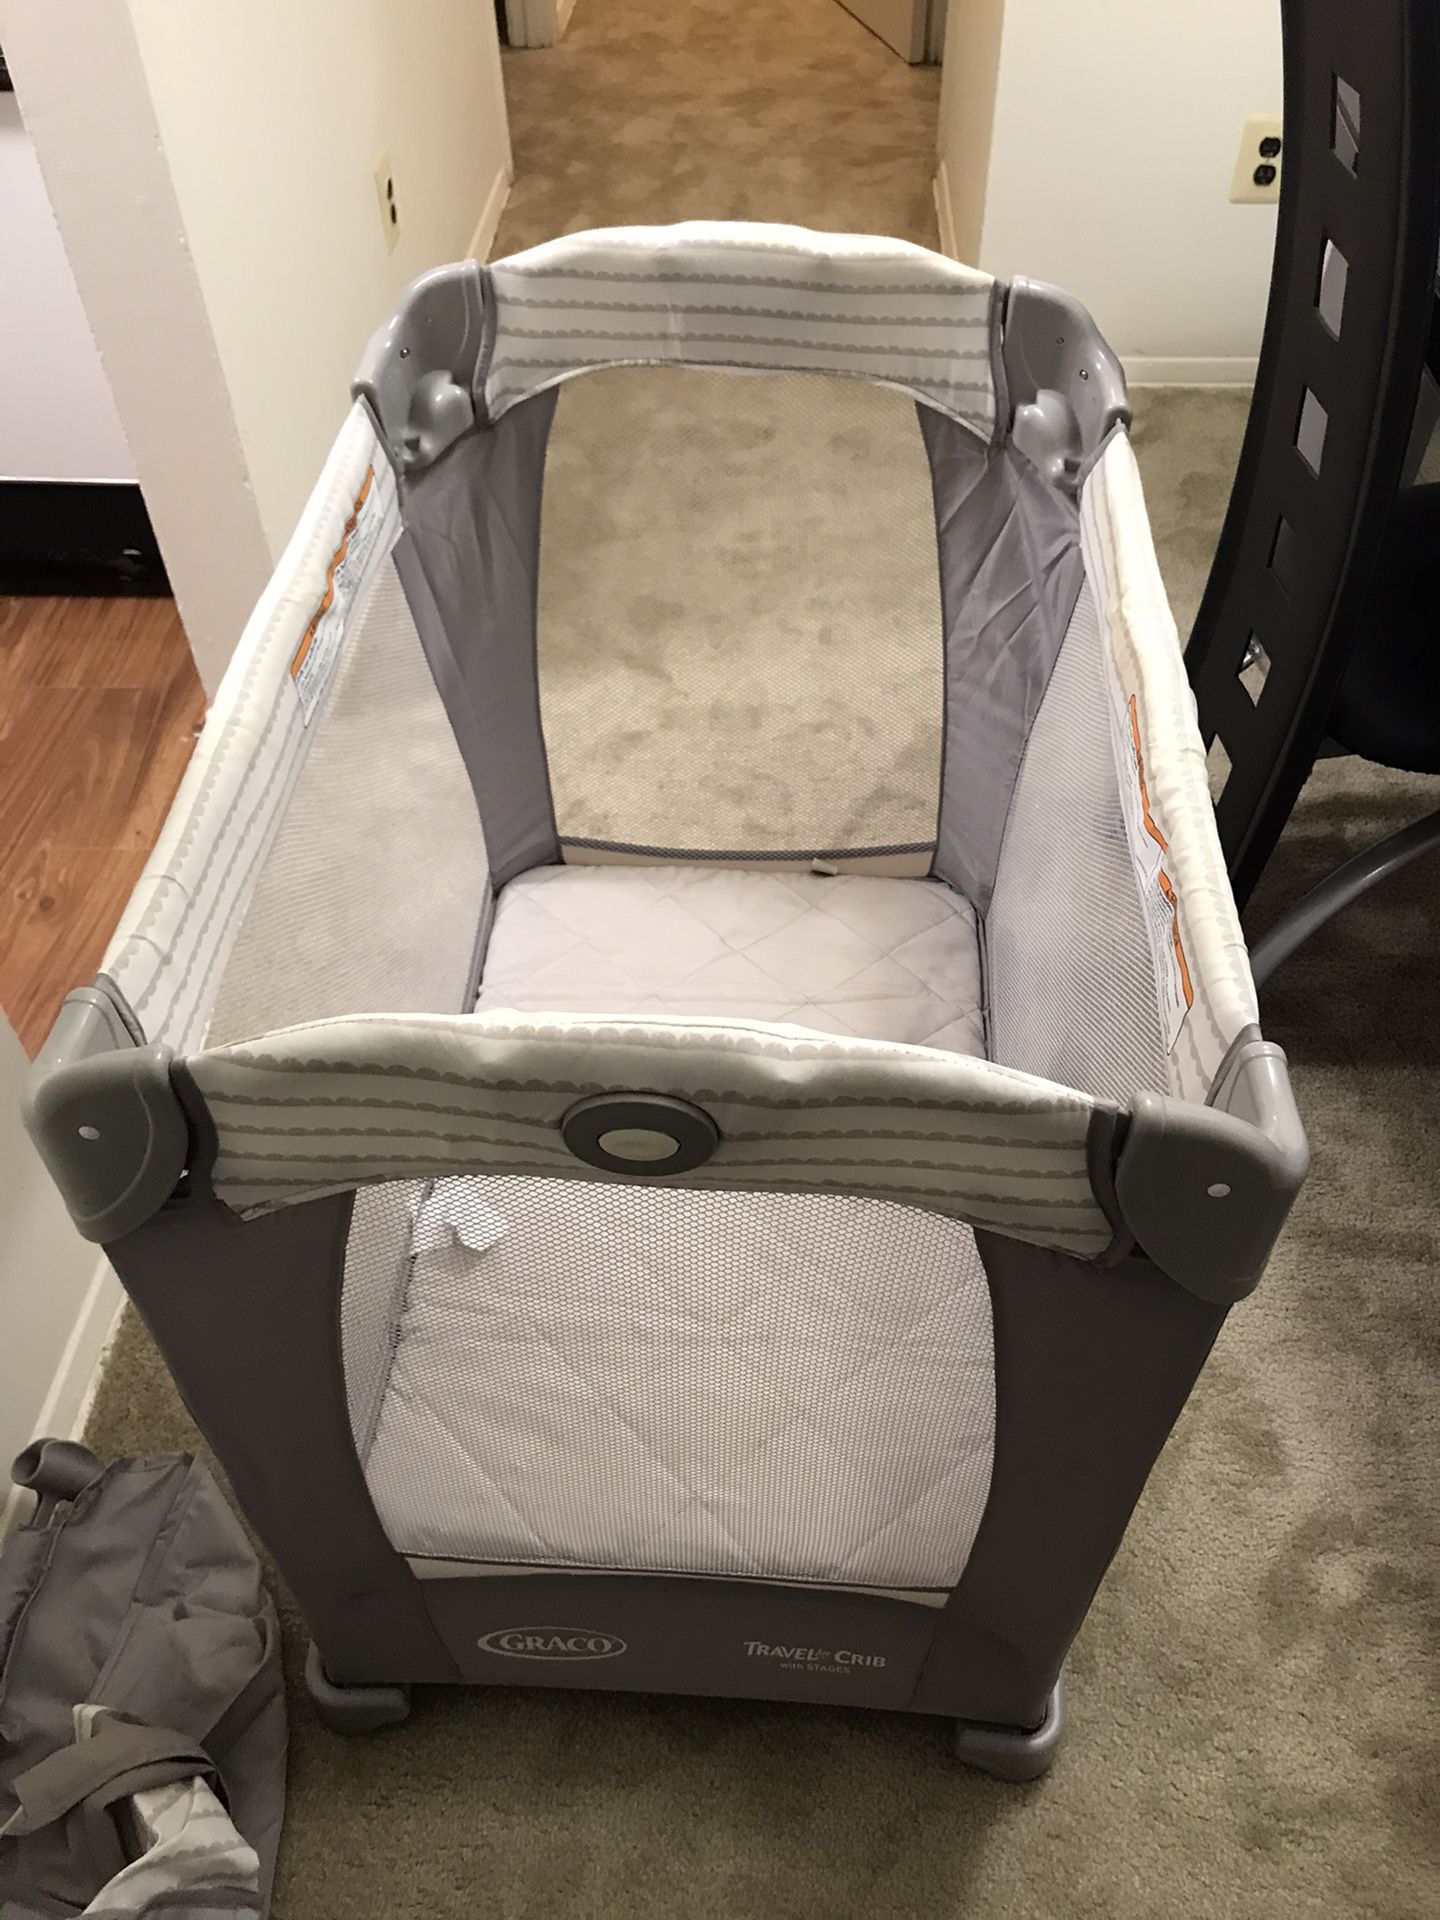 Graco pack and play $30